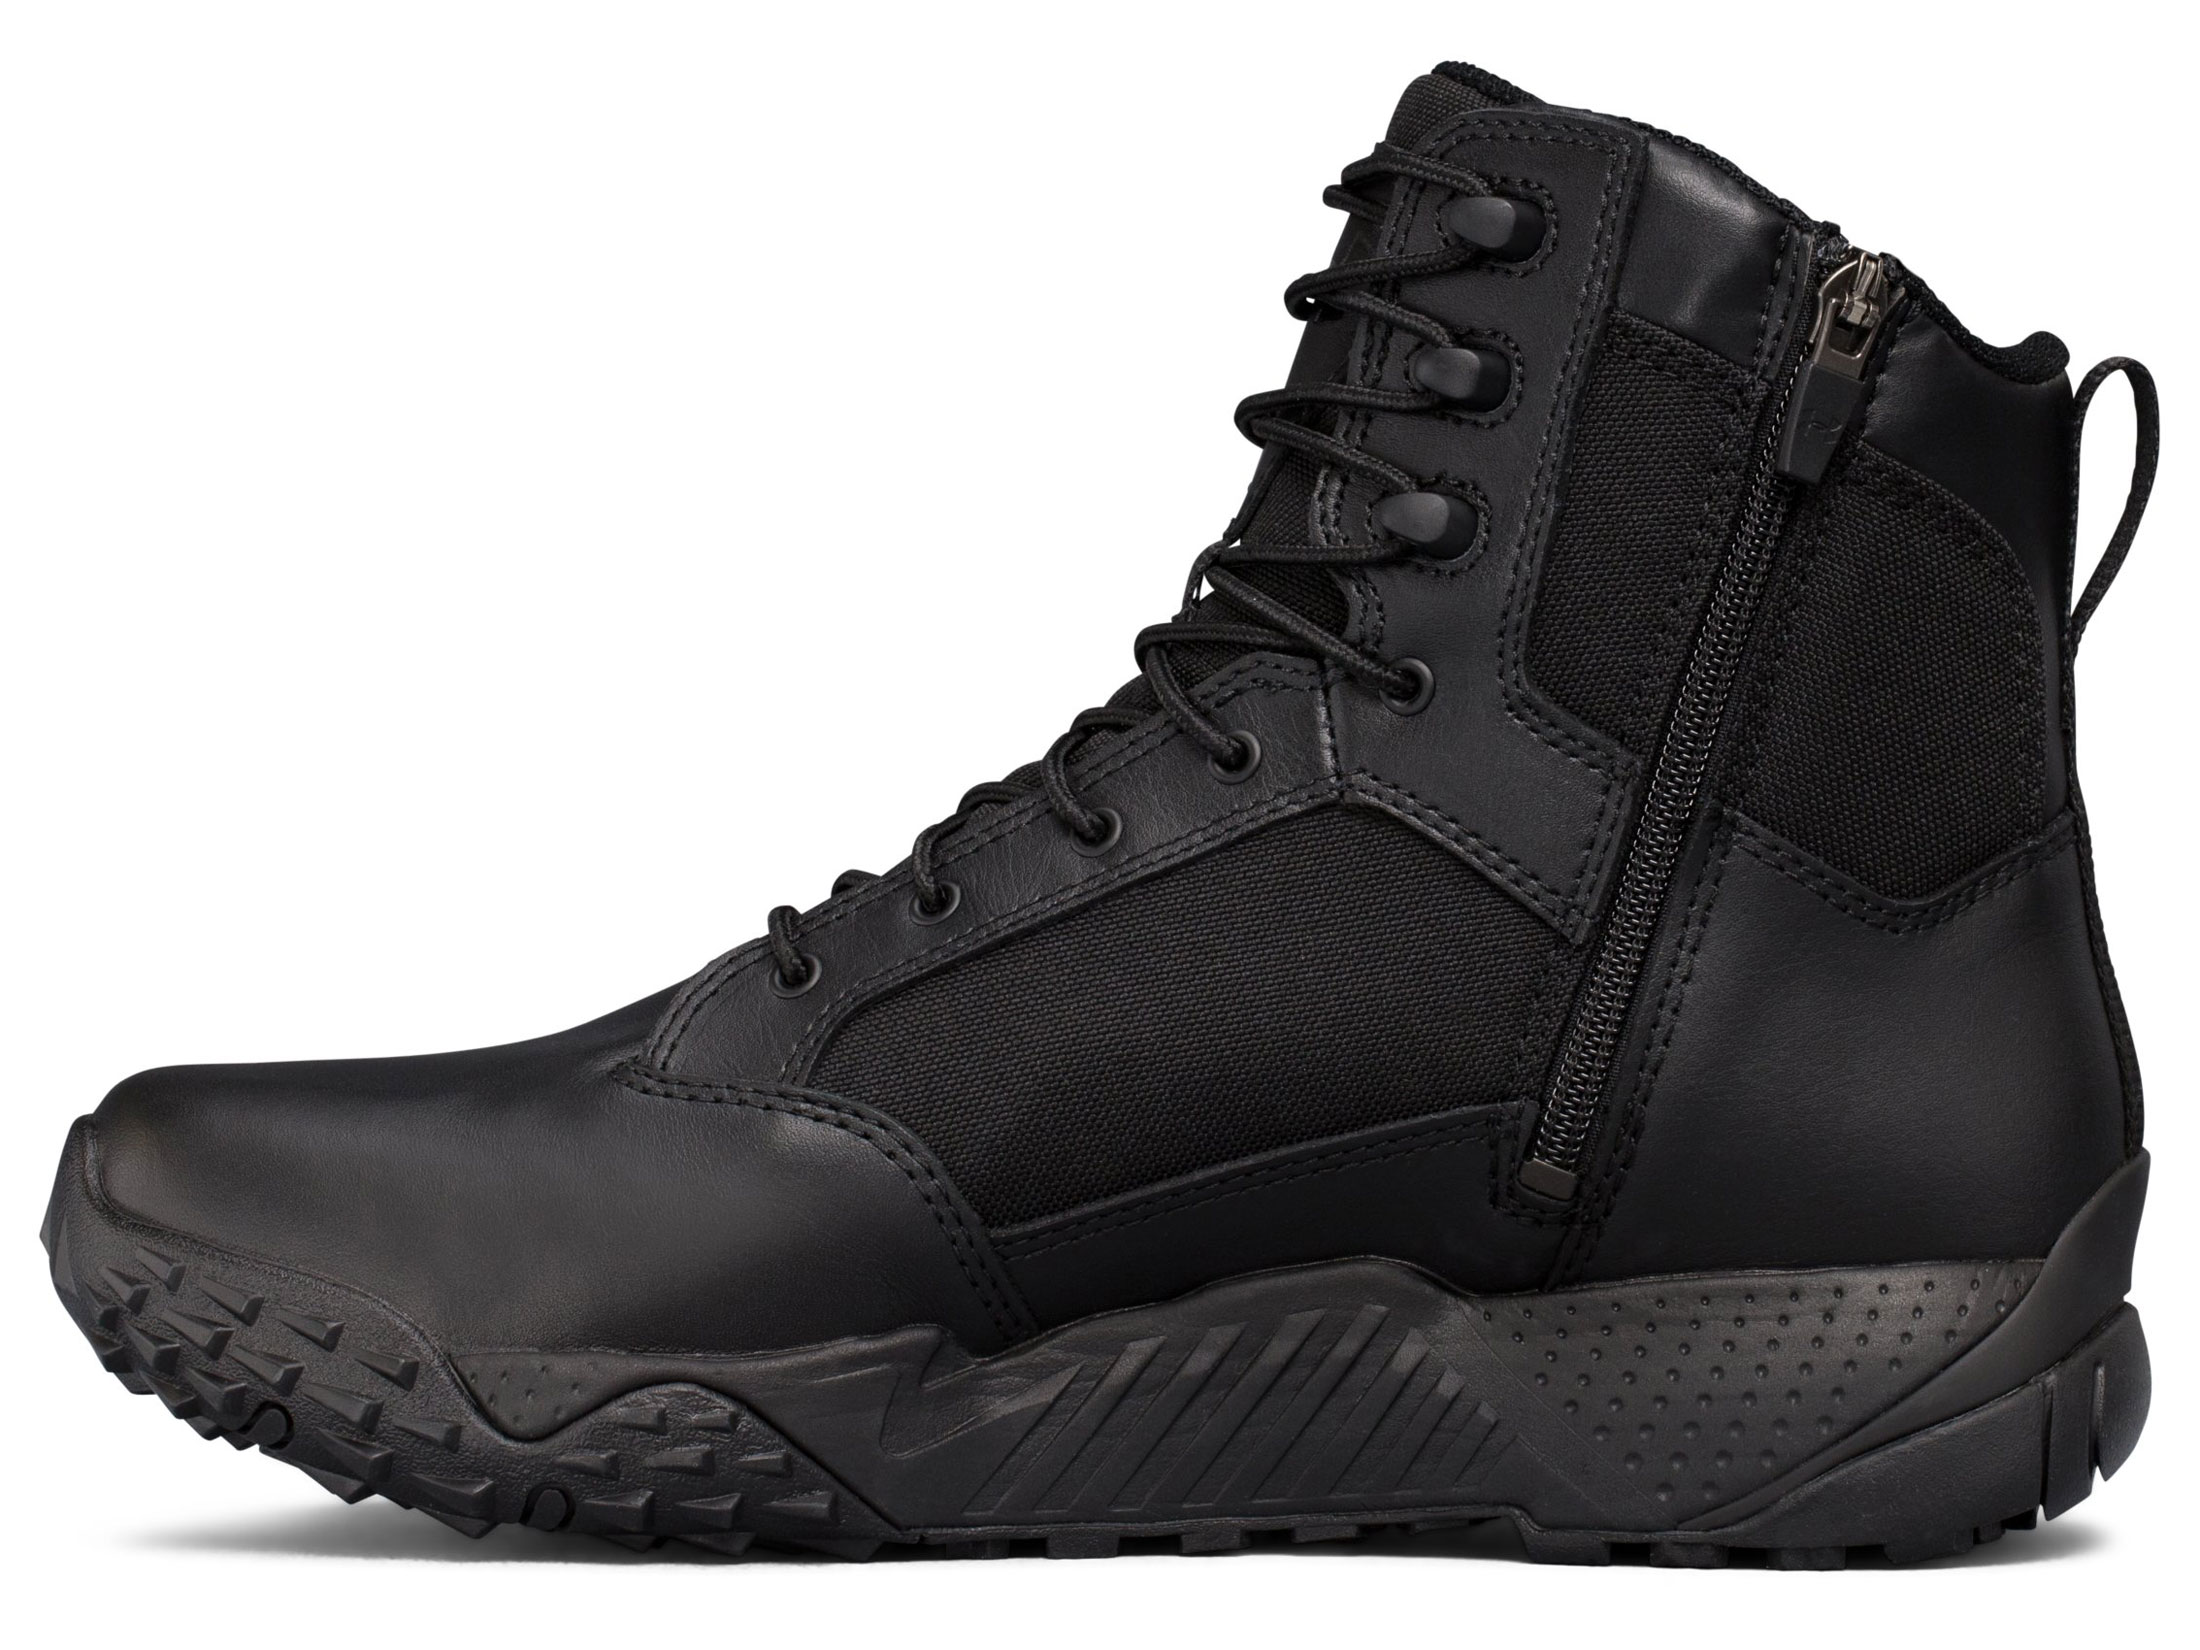 under armor safety toe boots Sale,up to 